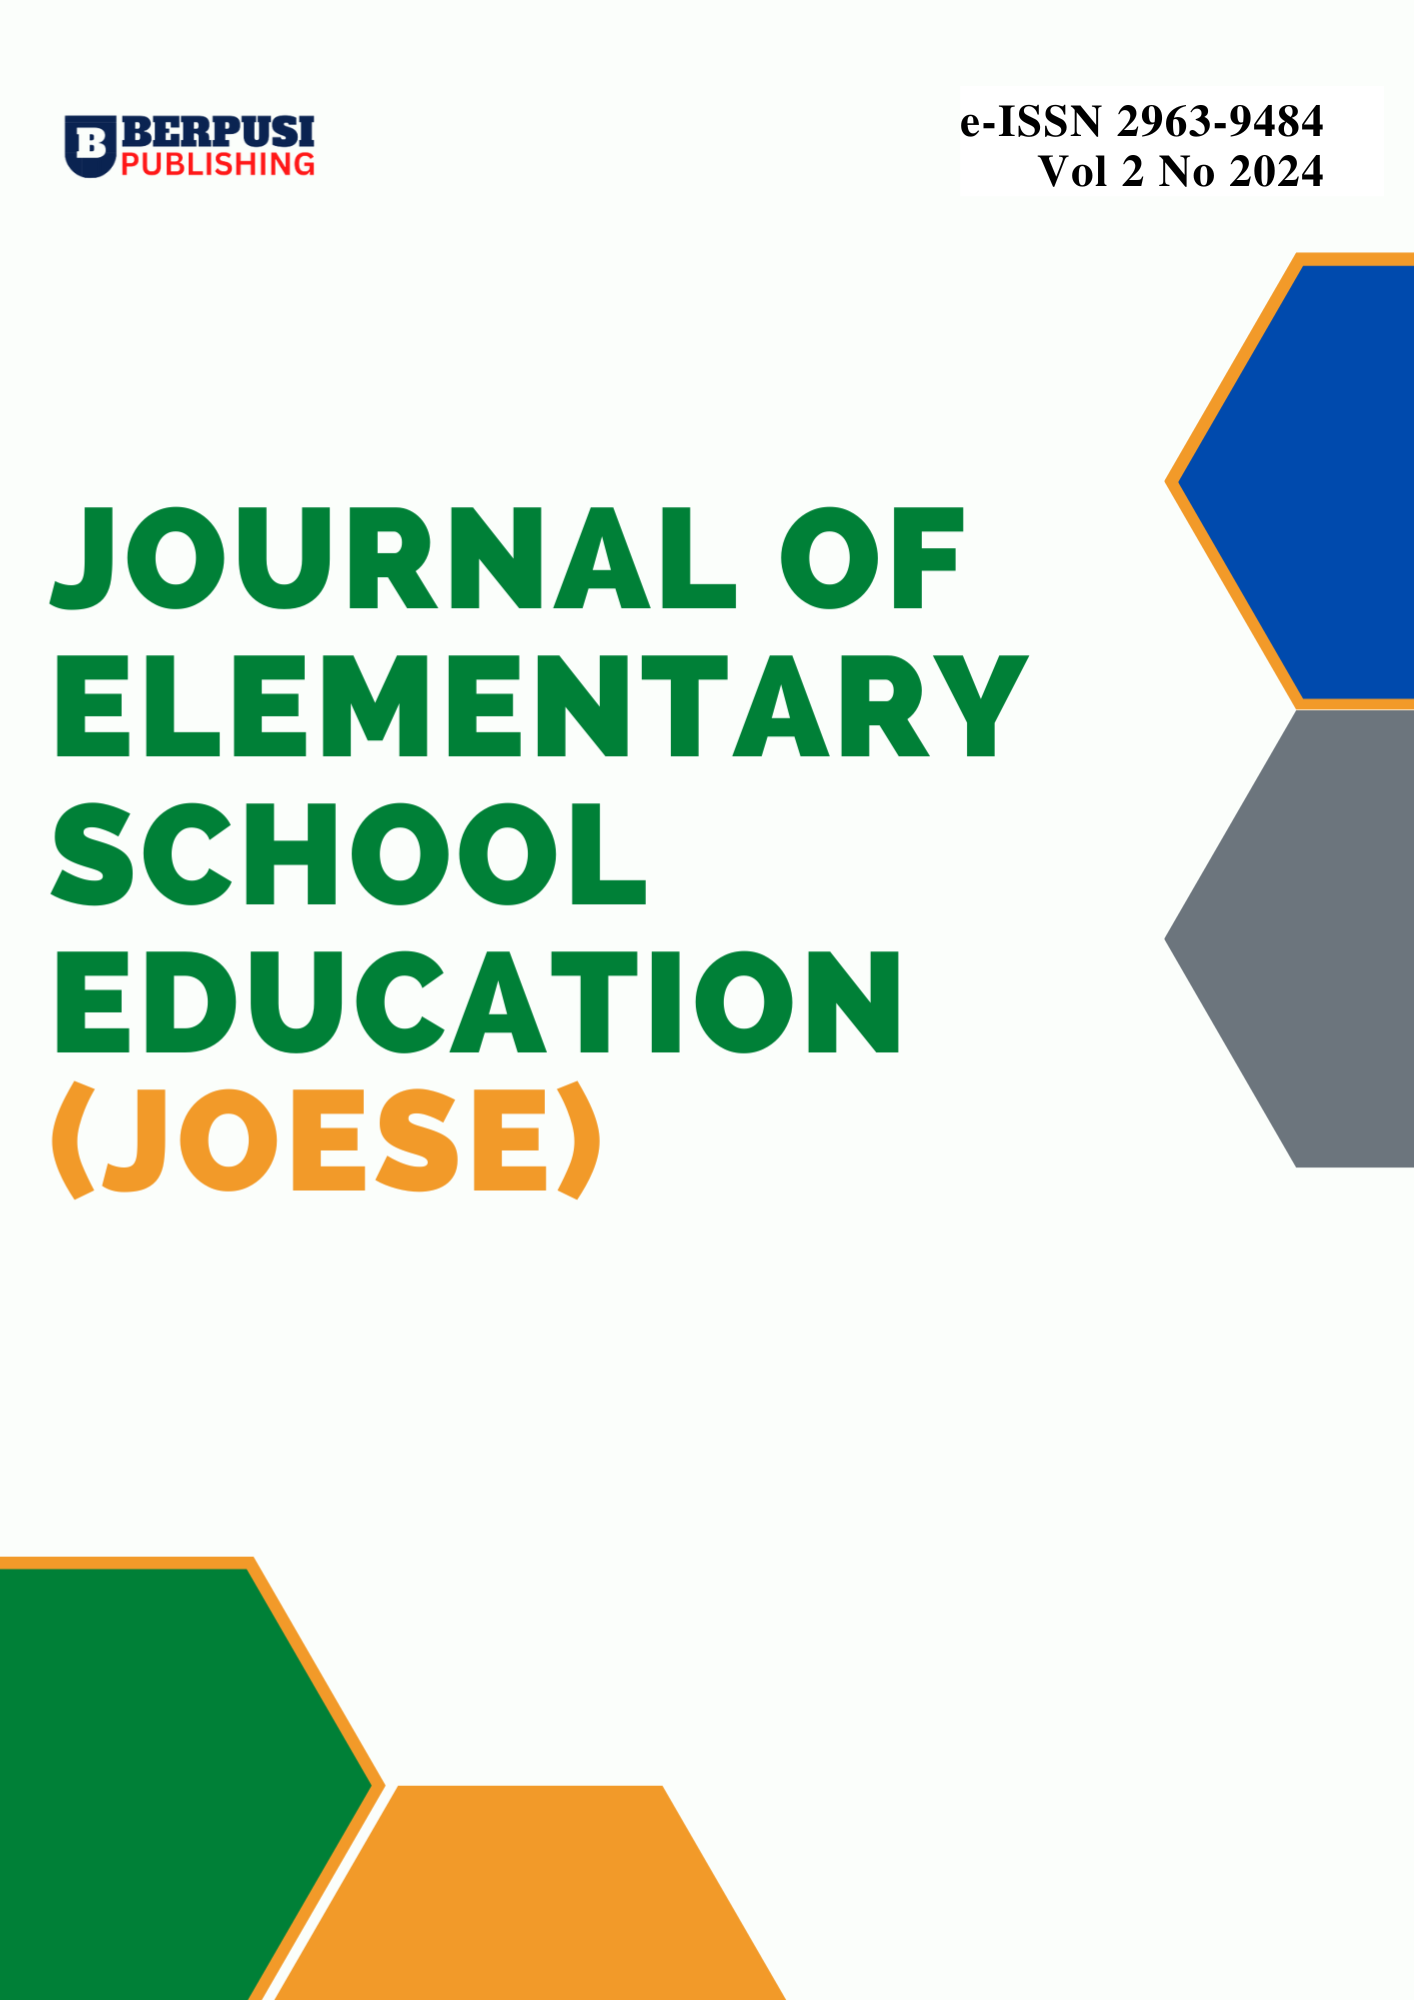 					View In Press Vol 2 No 2 Journal of Elementary School Education, (January, 2024)
				